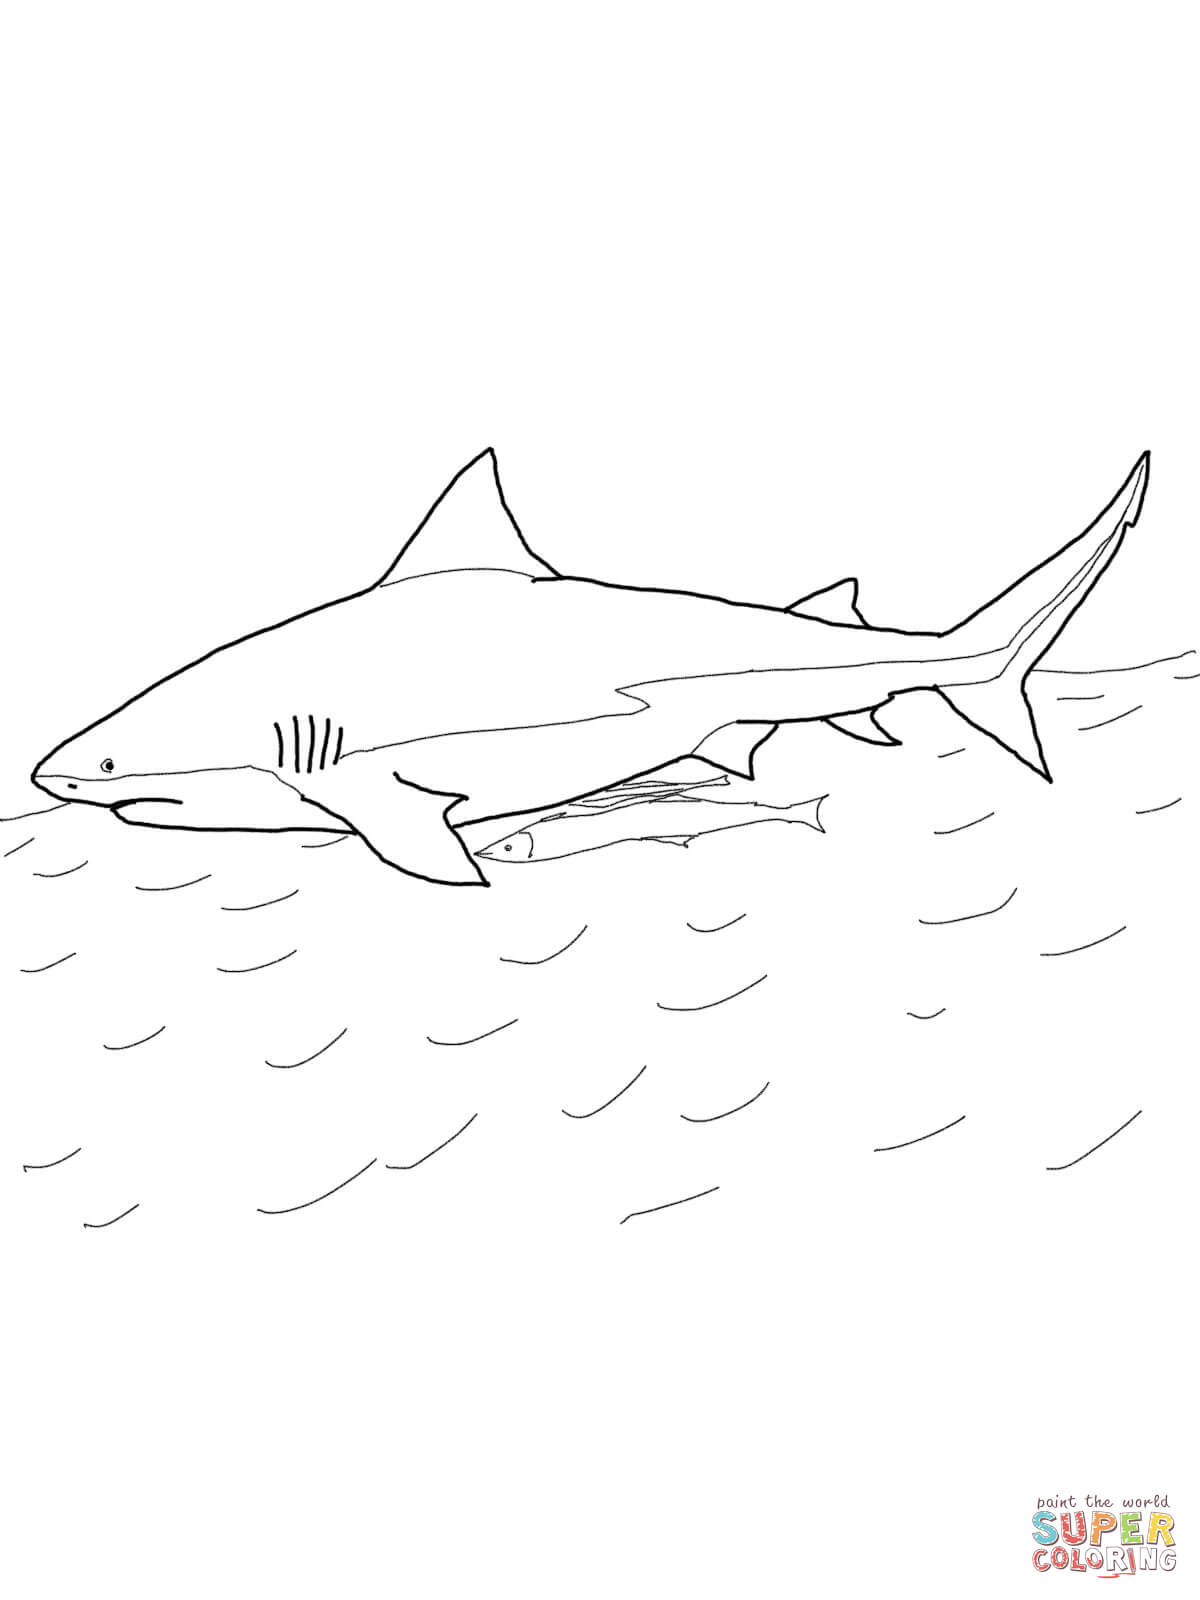 Megalodon Shark Drawing at GetDrawings.com | Free for personal use ...